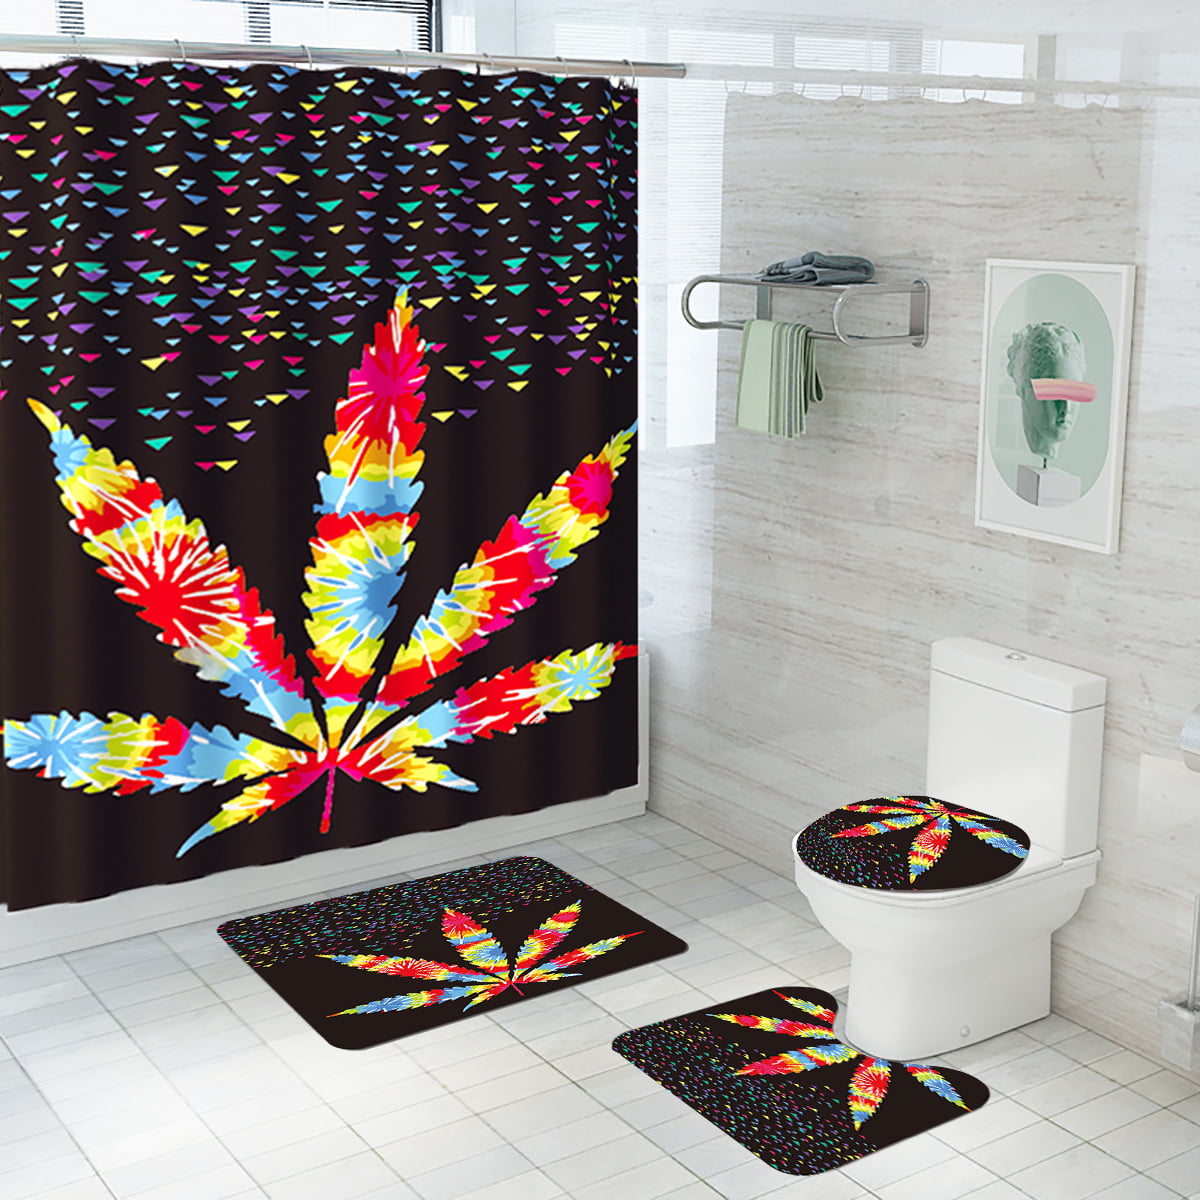 Details about   Red Rose Flower with Leaves Bathroom Polyester Fabric Shower Curtain & Hooks 